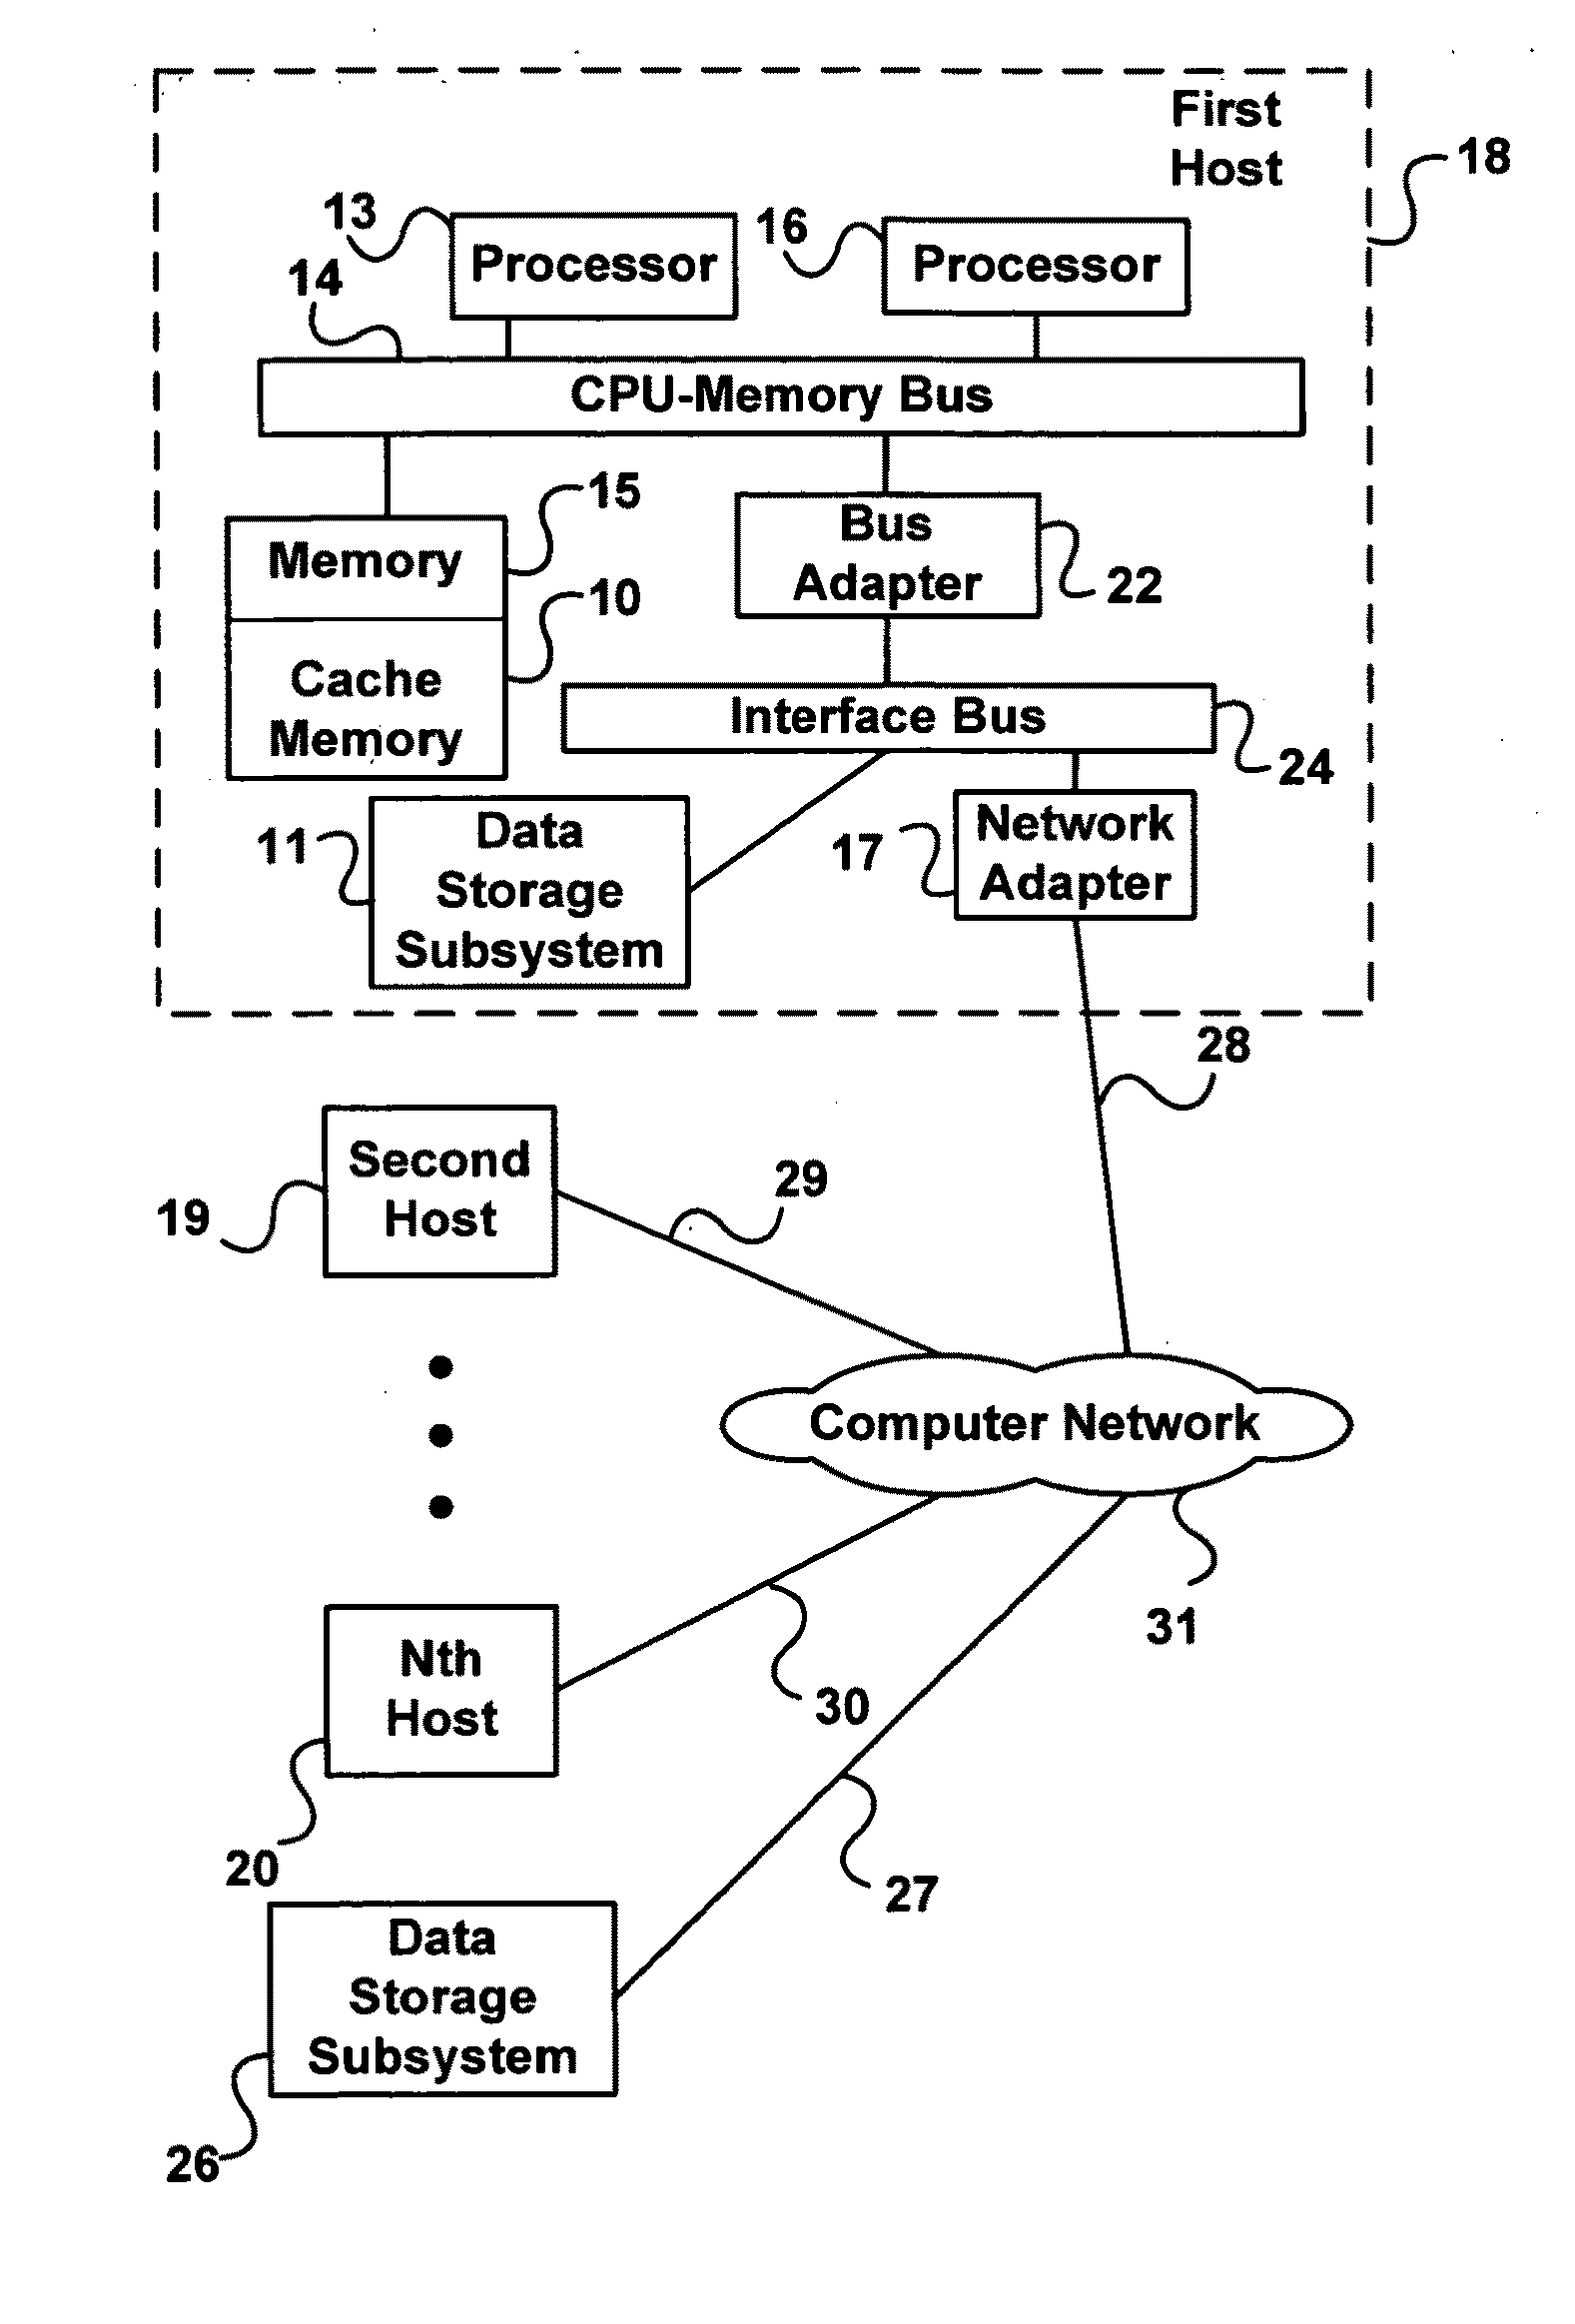 Methods and computer-readable medium to implement computing the propagation velocity of seismic waves